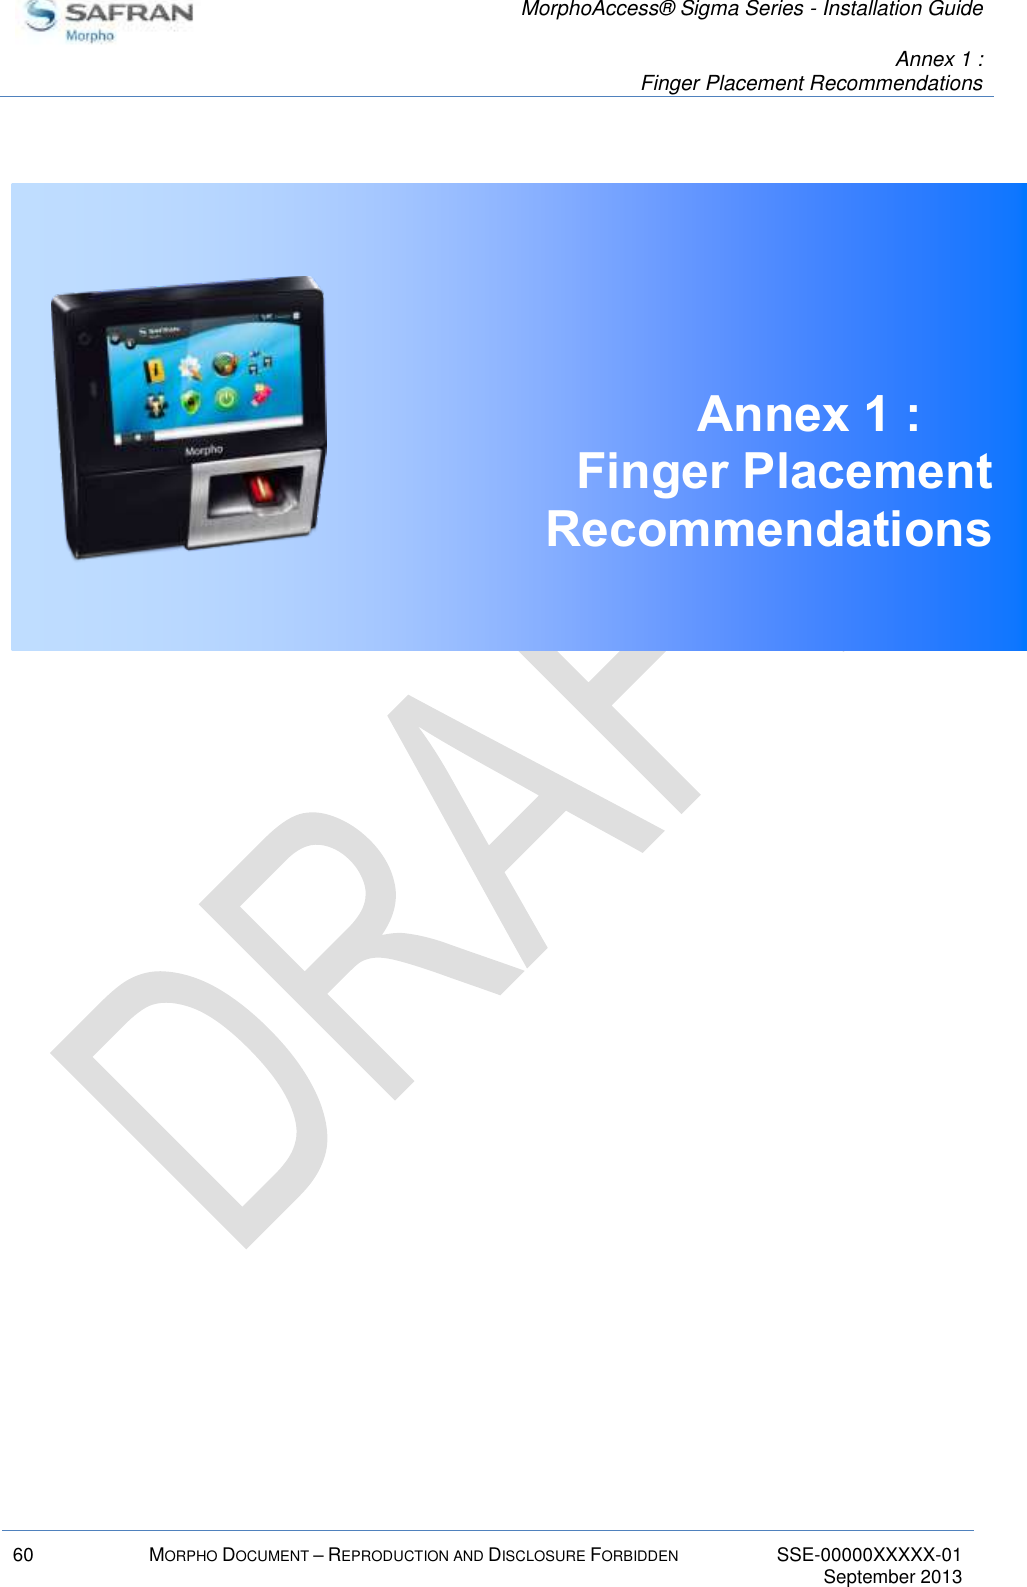   MorphoAccess® Sigma Series - Installation Guide   Annex 1 :  Finger Placement Recommendations  60 MORPHO DOCUMENT – REPRODUCTION AND DISCLOSURE FORBIDDEN SSE-00000XXXXX-01   September 2013   Annex 1 :   Finger Placement Recommendations     